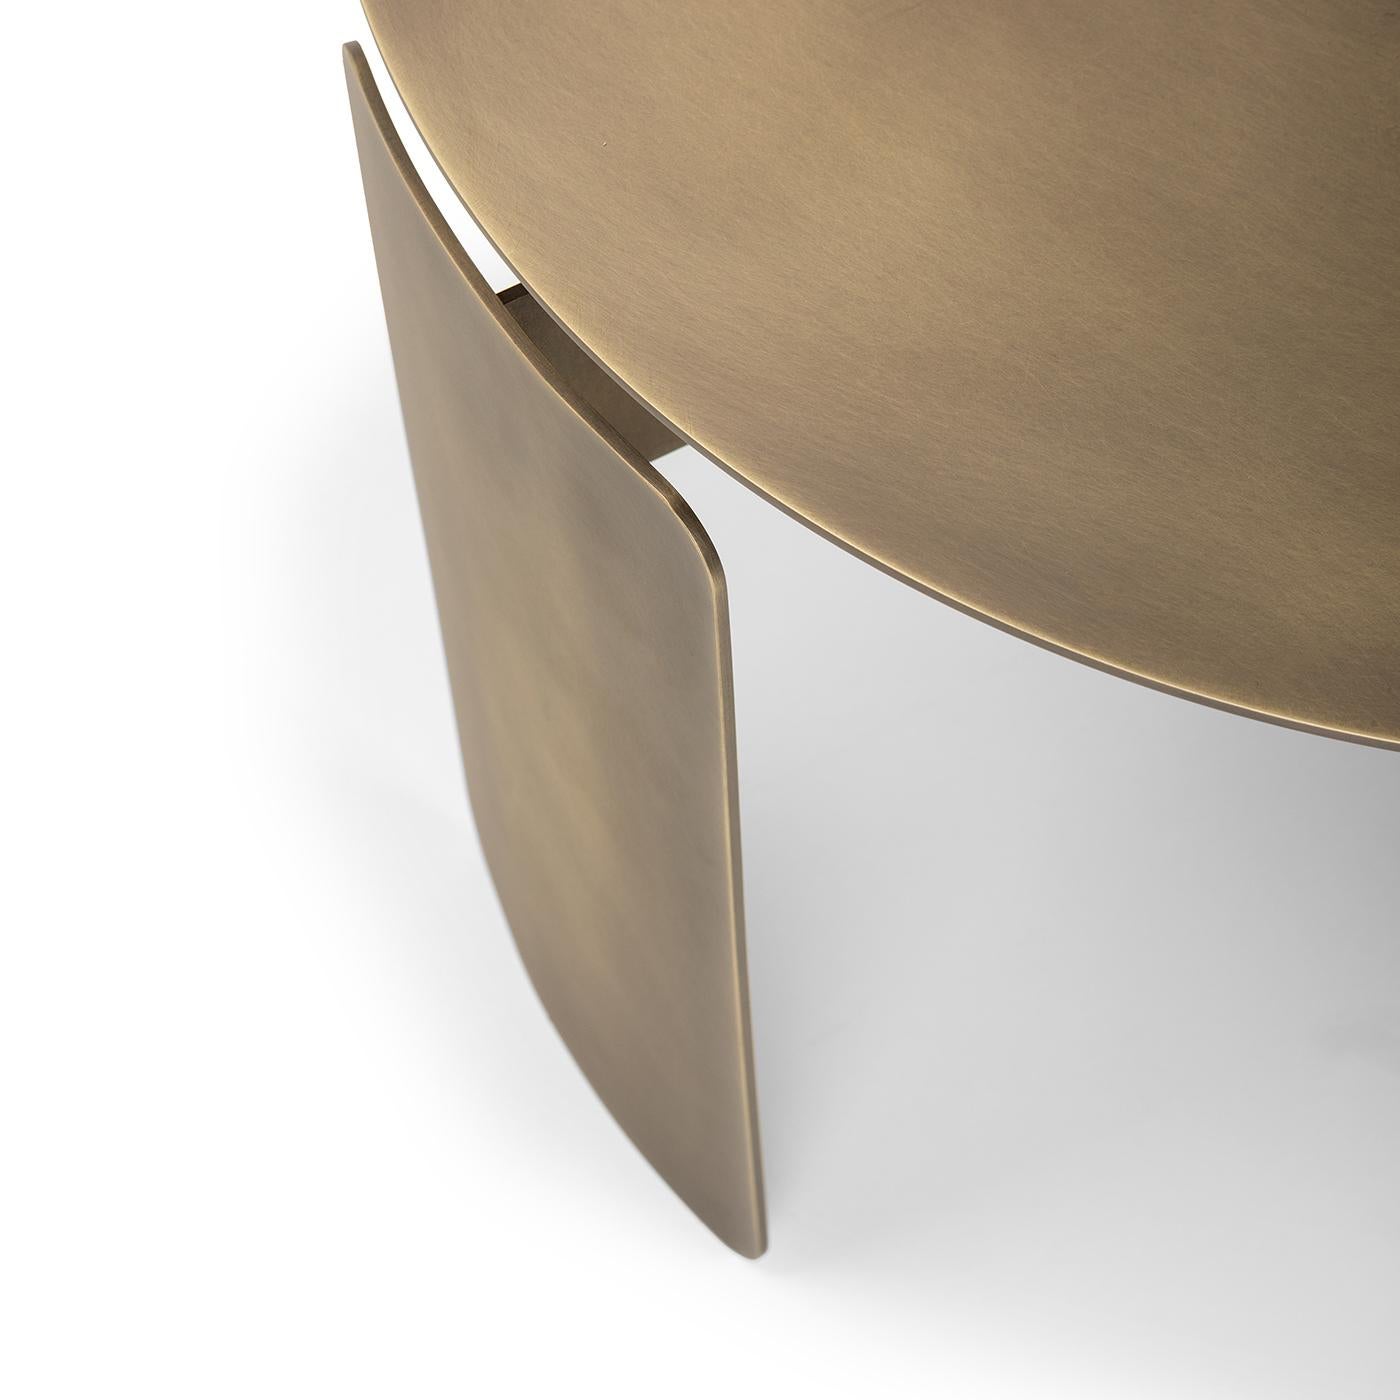 The design of the Shirudo coffee table is inspired by traditional oriental shields (shirudo in Japanese), whose shape is recalled by the softly curved legs that follow, without touching, the shape of the round top. Finished in matte nickel, the